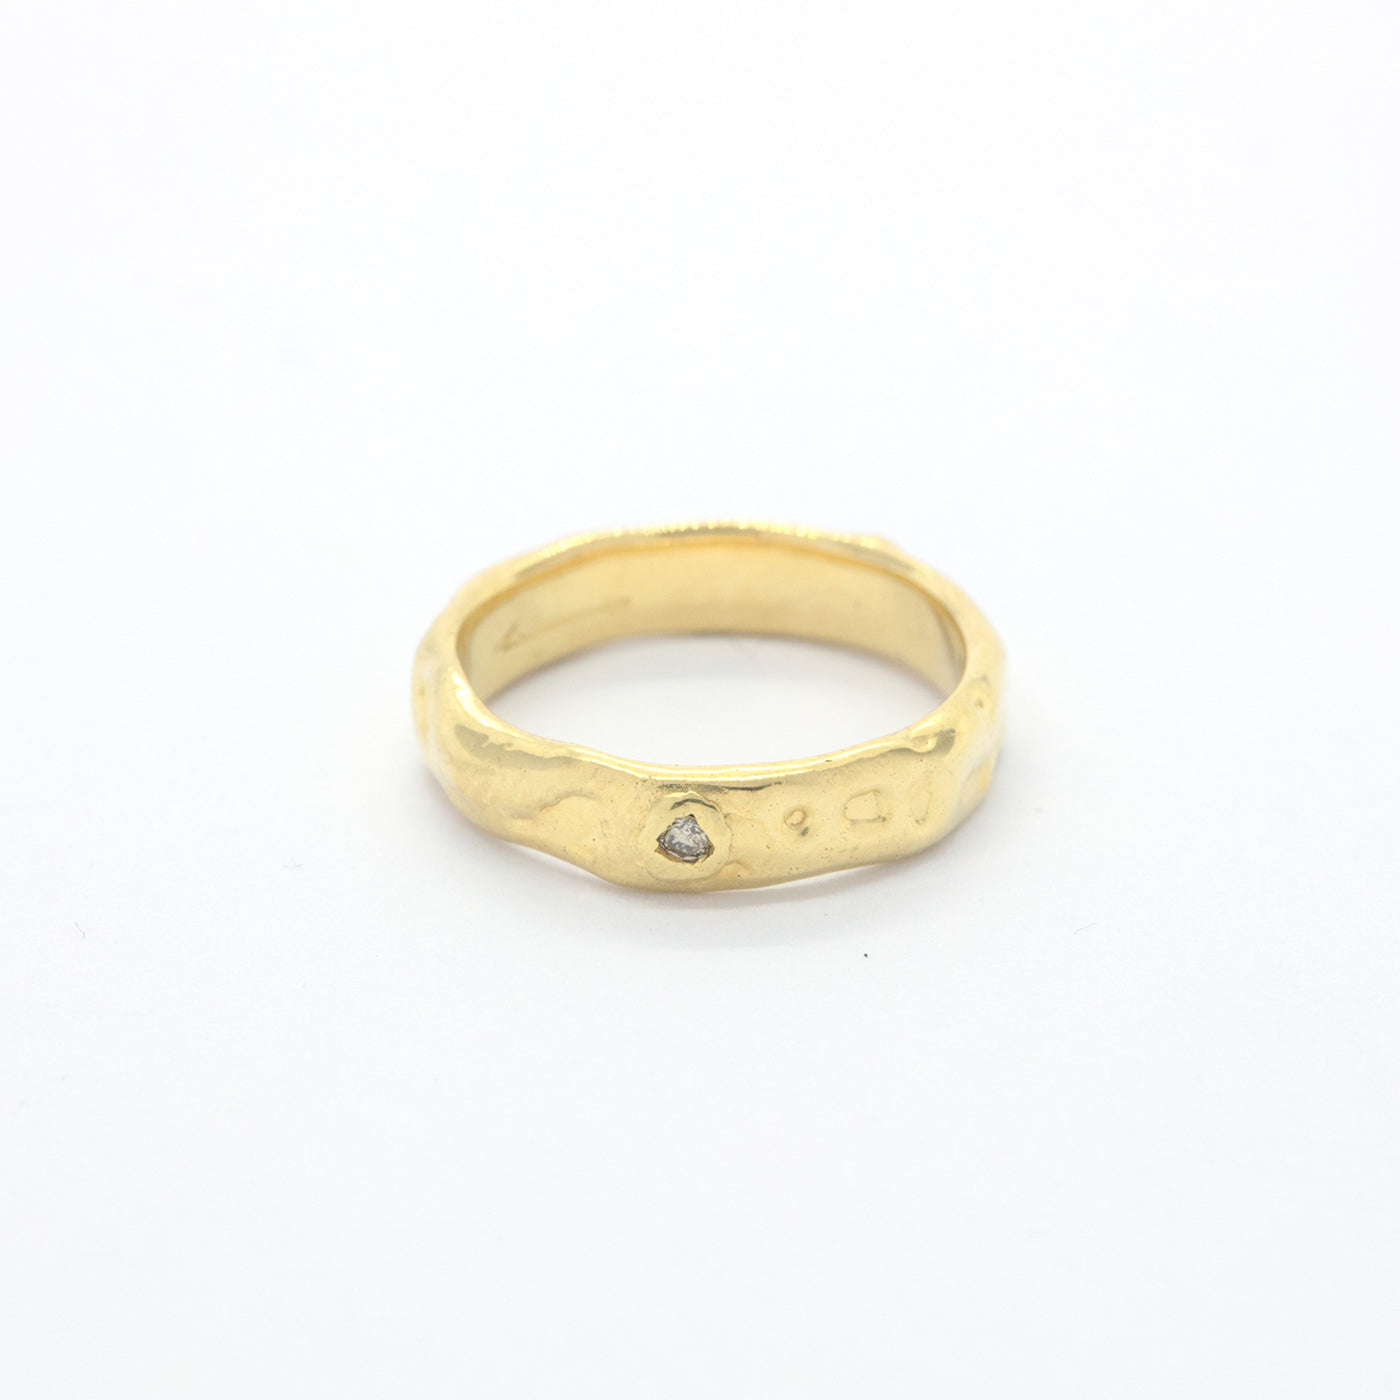 Ring Aine Wedding Band for Her 14ct or 18ct yellow gold 0.02 ct champagne diamond product side view innan jewellery independent atelier berlin